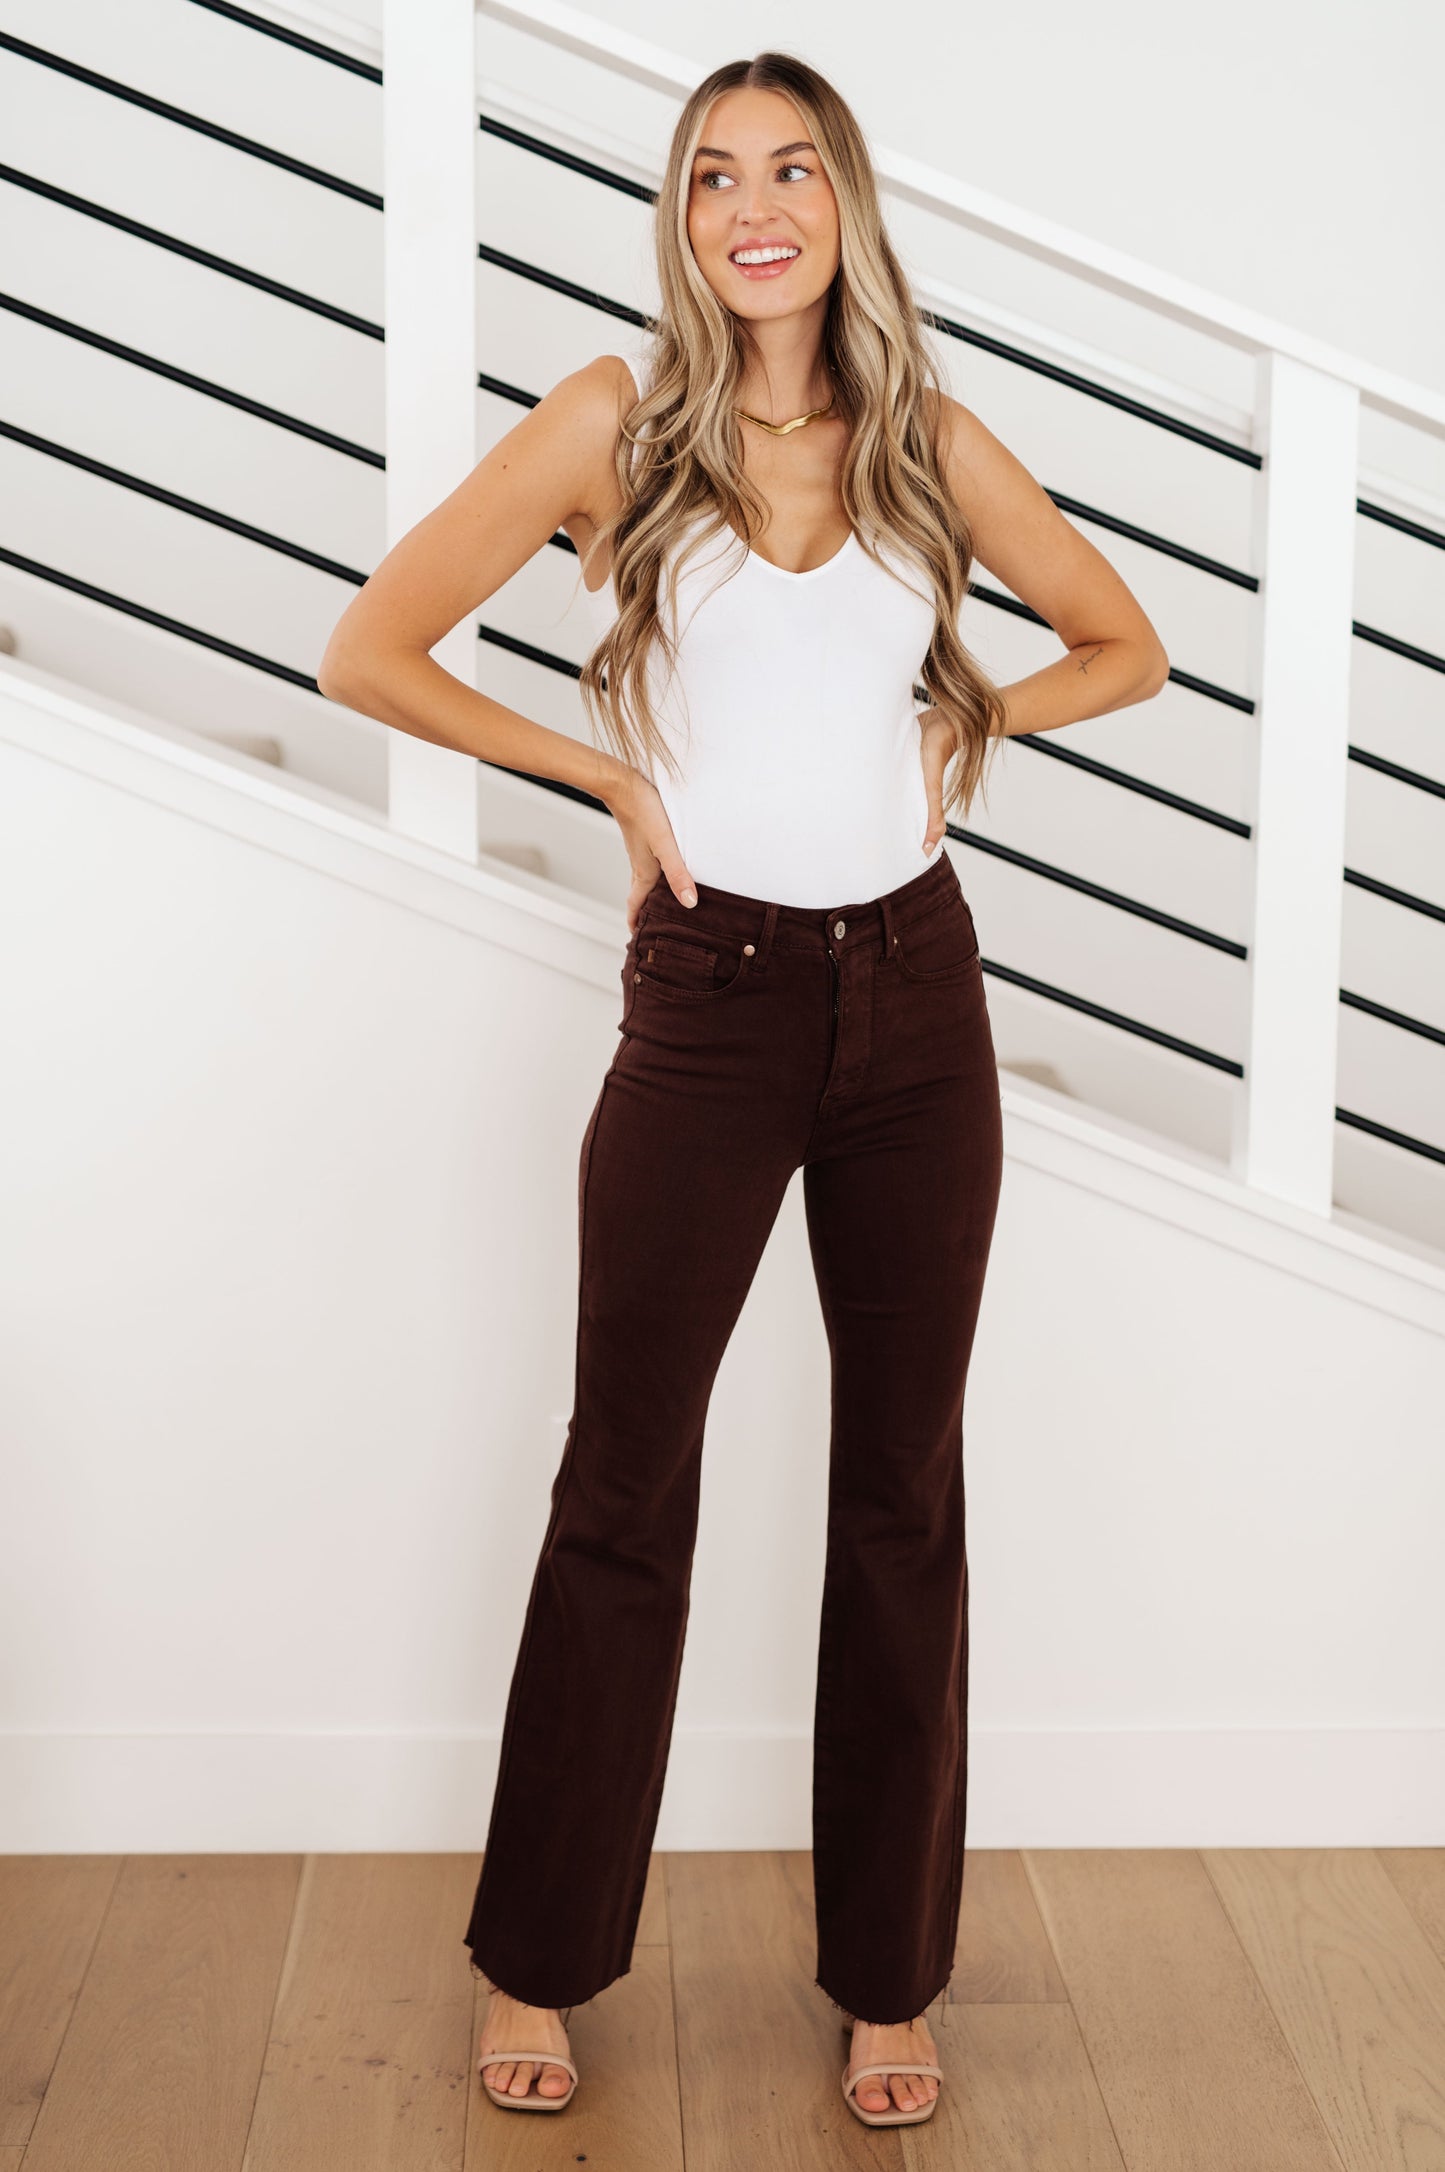 Judy Blue High Rise Tummy Control Top Flare Jeans in Espresso